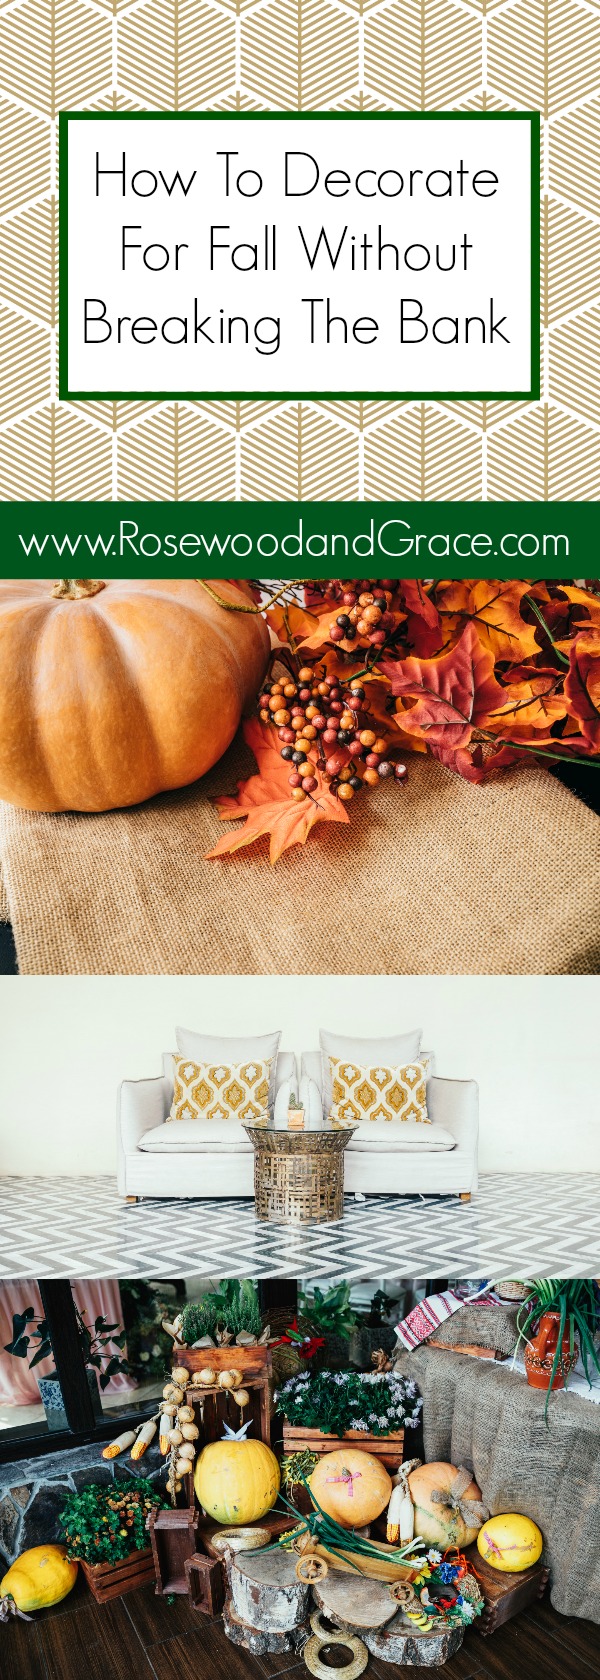 Decorating for fall is fun, and expensive! That's why I want to share with you my tips to decorate for fall without breaking the bank.